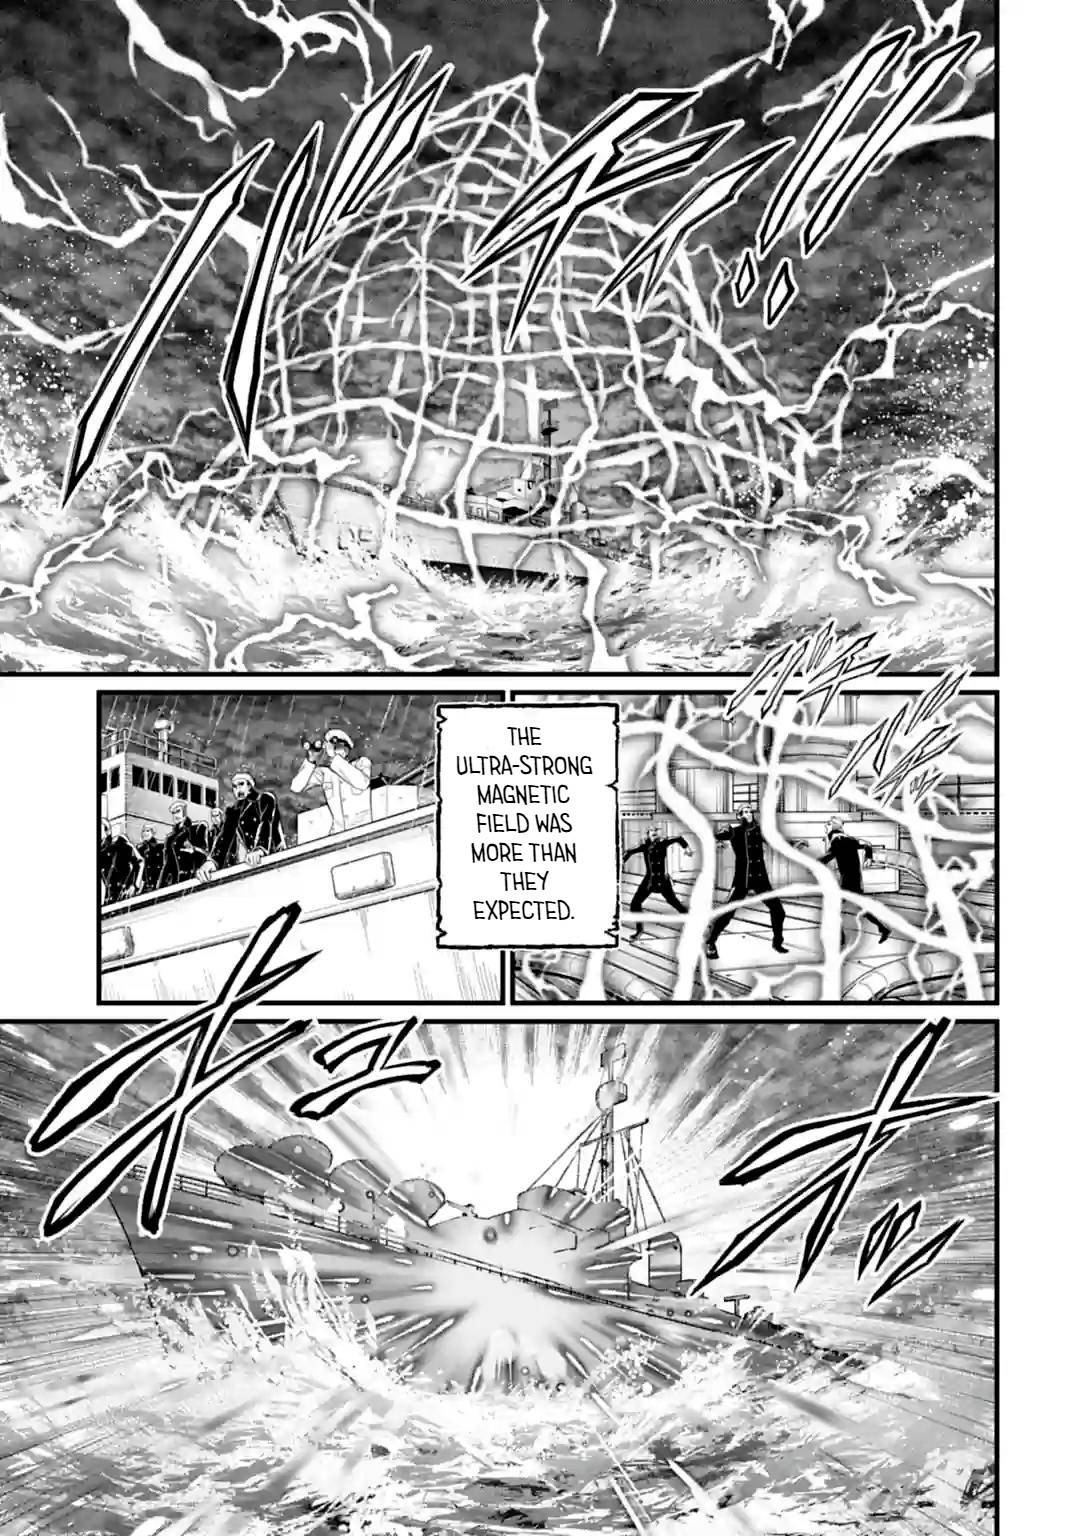 Chapter - Shuumatsu no Valkyrie Chapter 72 Spoilers & Discussion